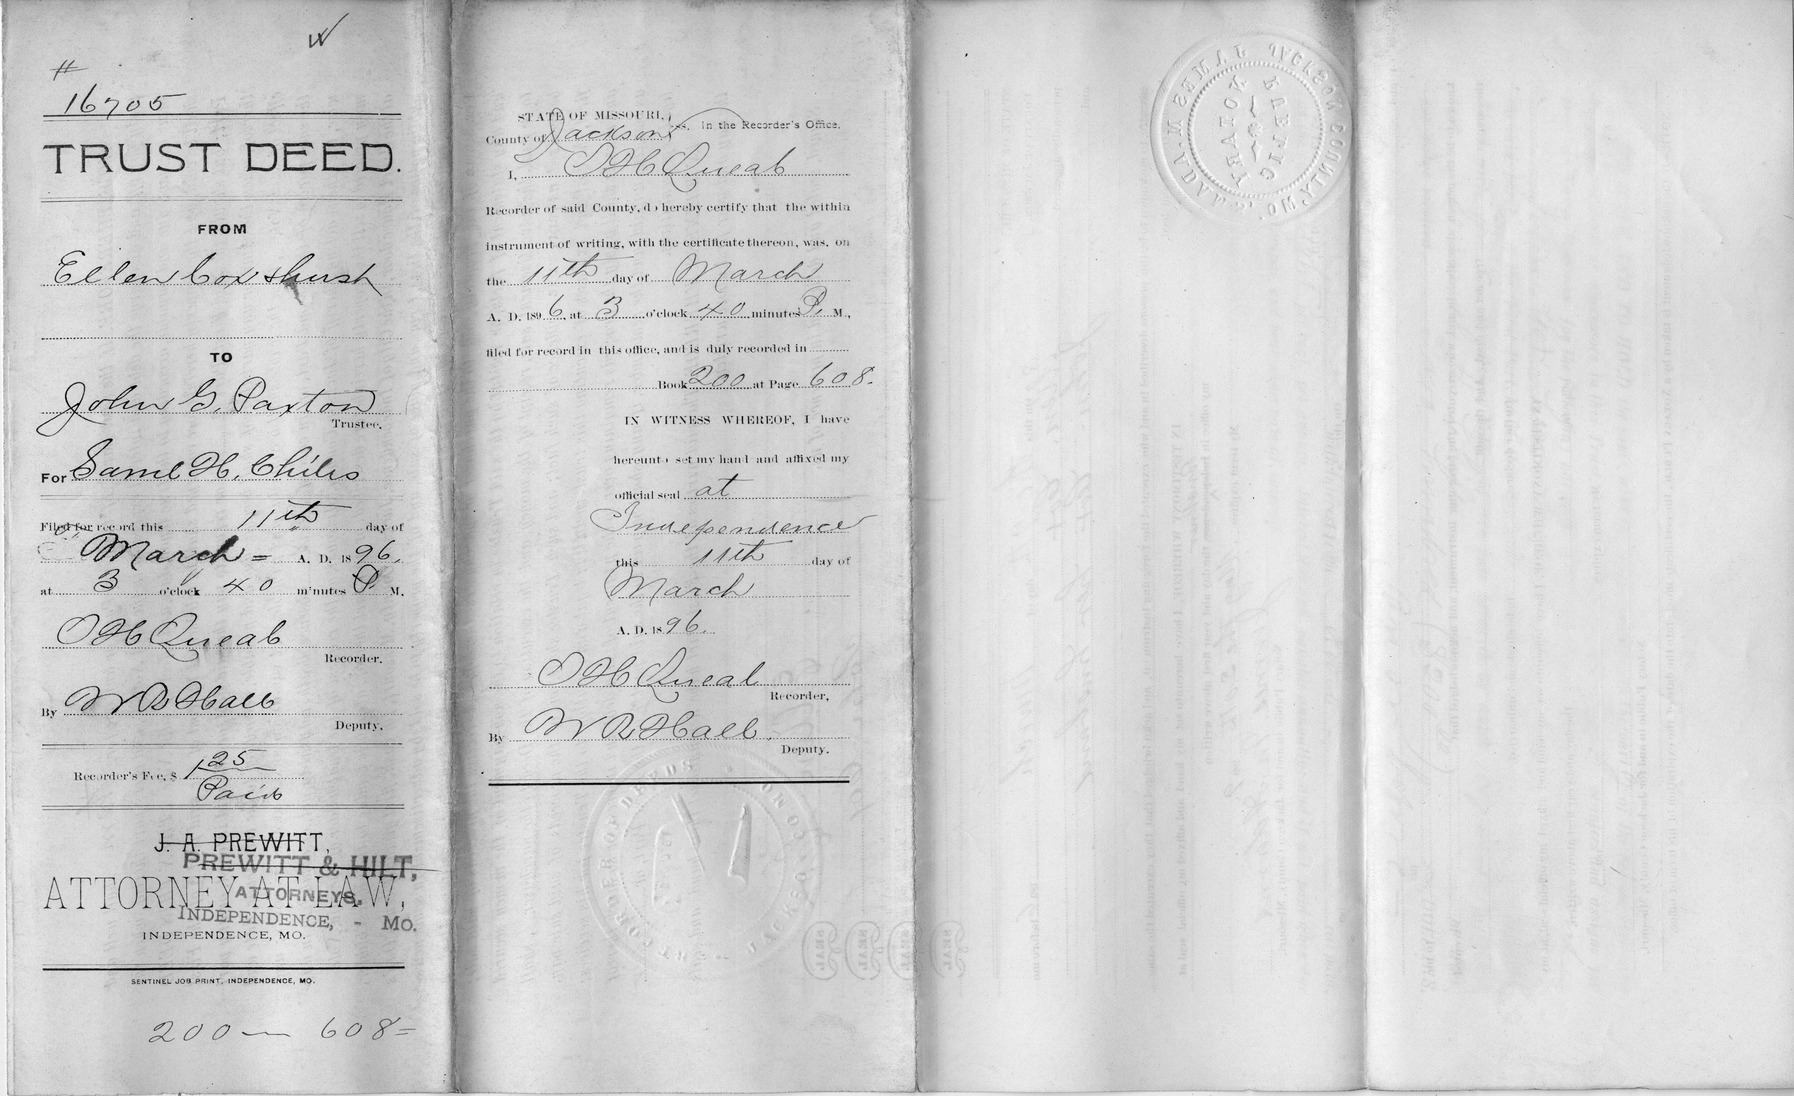 Trust Deed from Ellen Cox and John Cox to John G. Paxton and Samuel H. Chiles